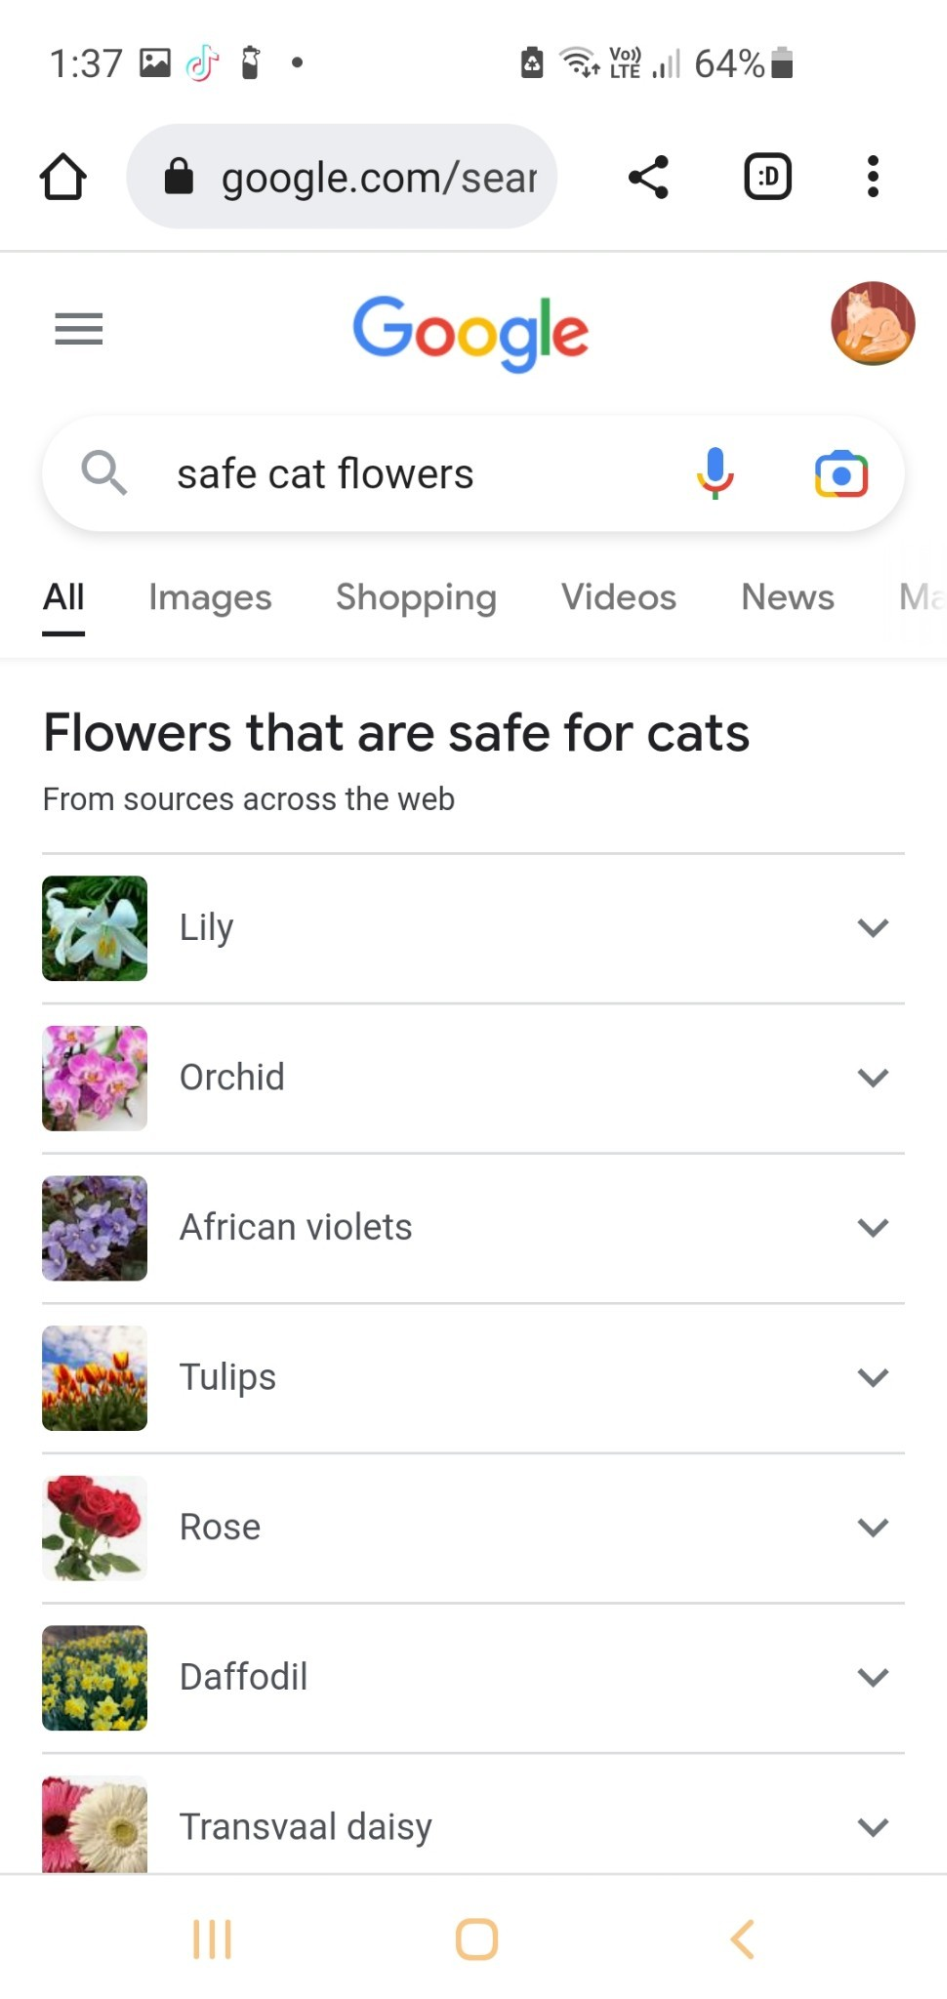 safe cat flowers starting with lily an unsafe flower for cats